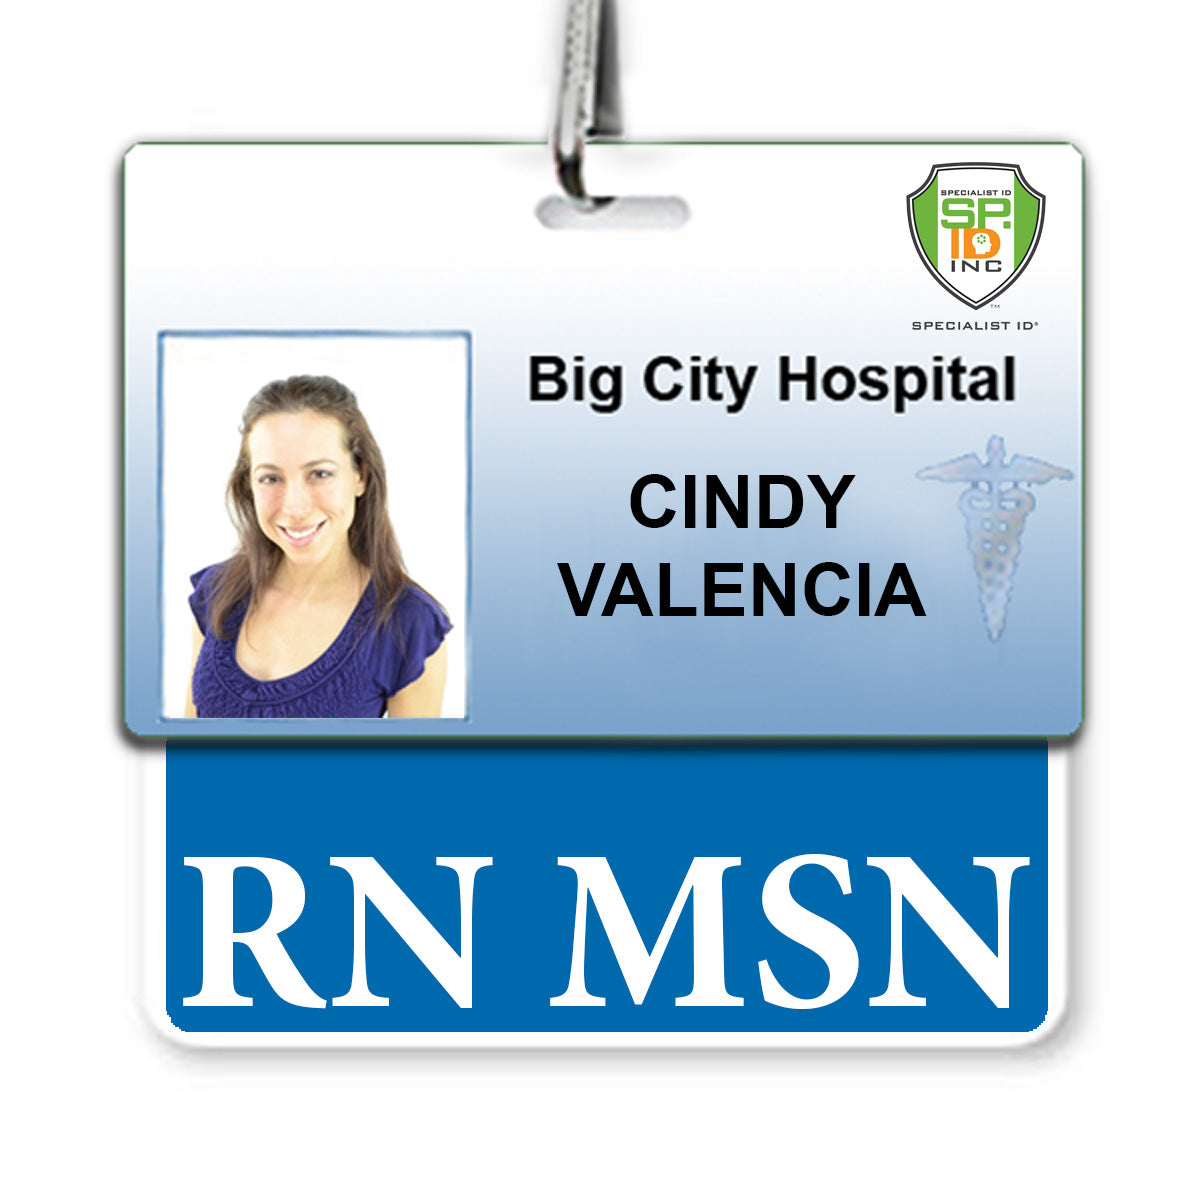 Identification badge for Big City Hospital featuring a photograph of a woman and the name "Cindy Valencia, RN MSN," displayed in an RN MSN Badge Buddy Horizontal for Nurse - Double Sided Print ID Badge Backer (Standard Size).